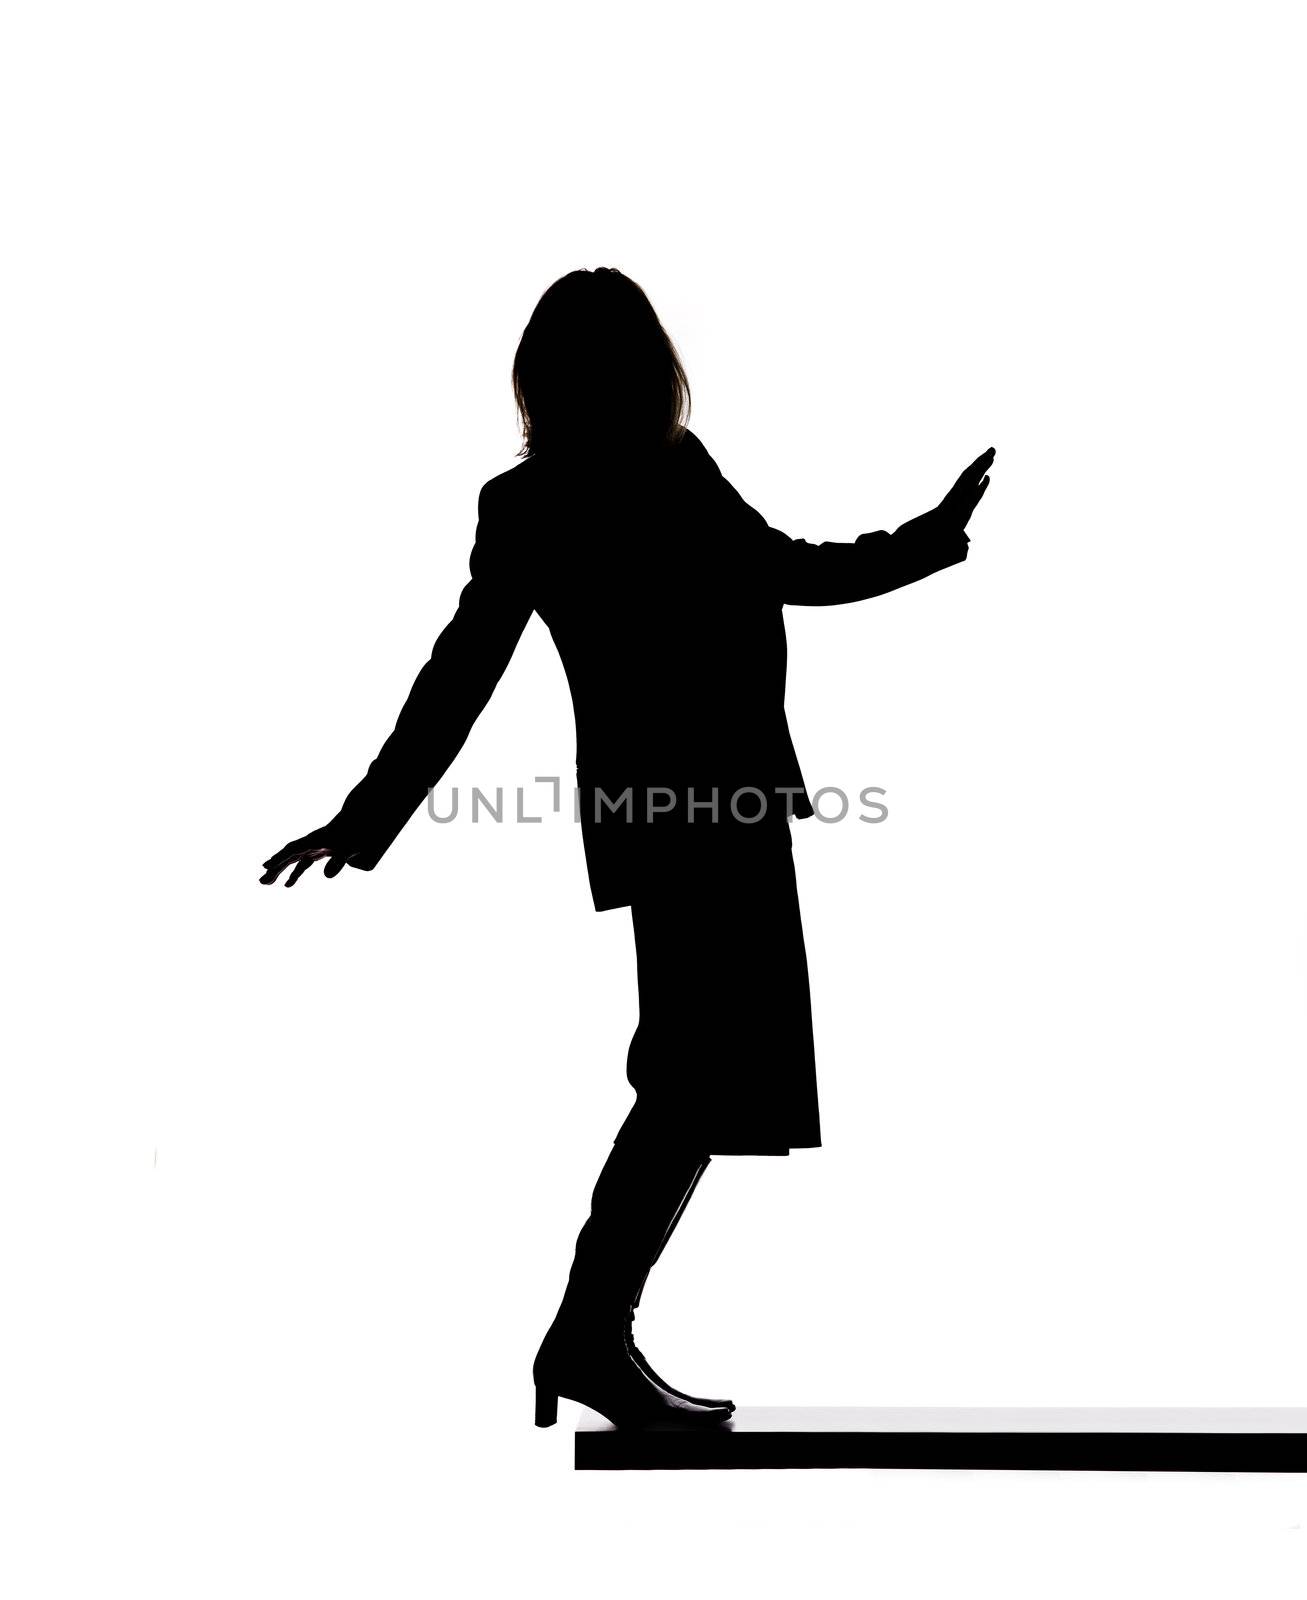 Silhouette of a woman on a board by gemenacom